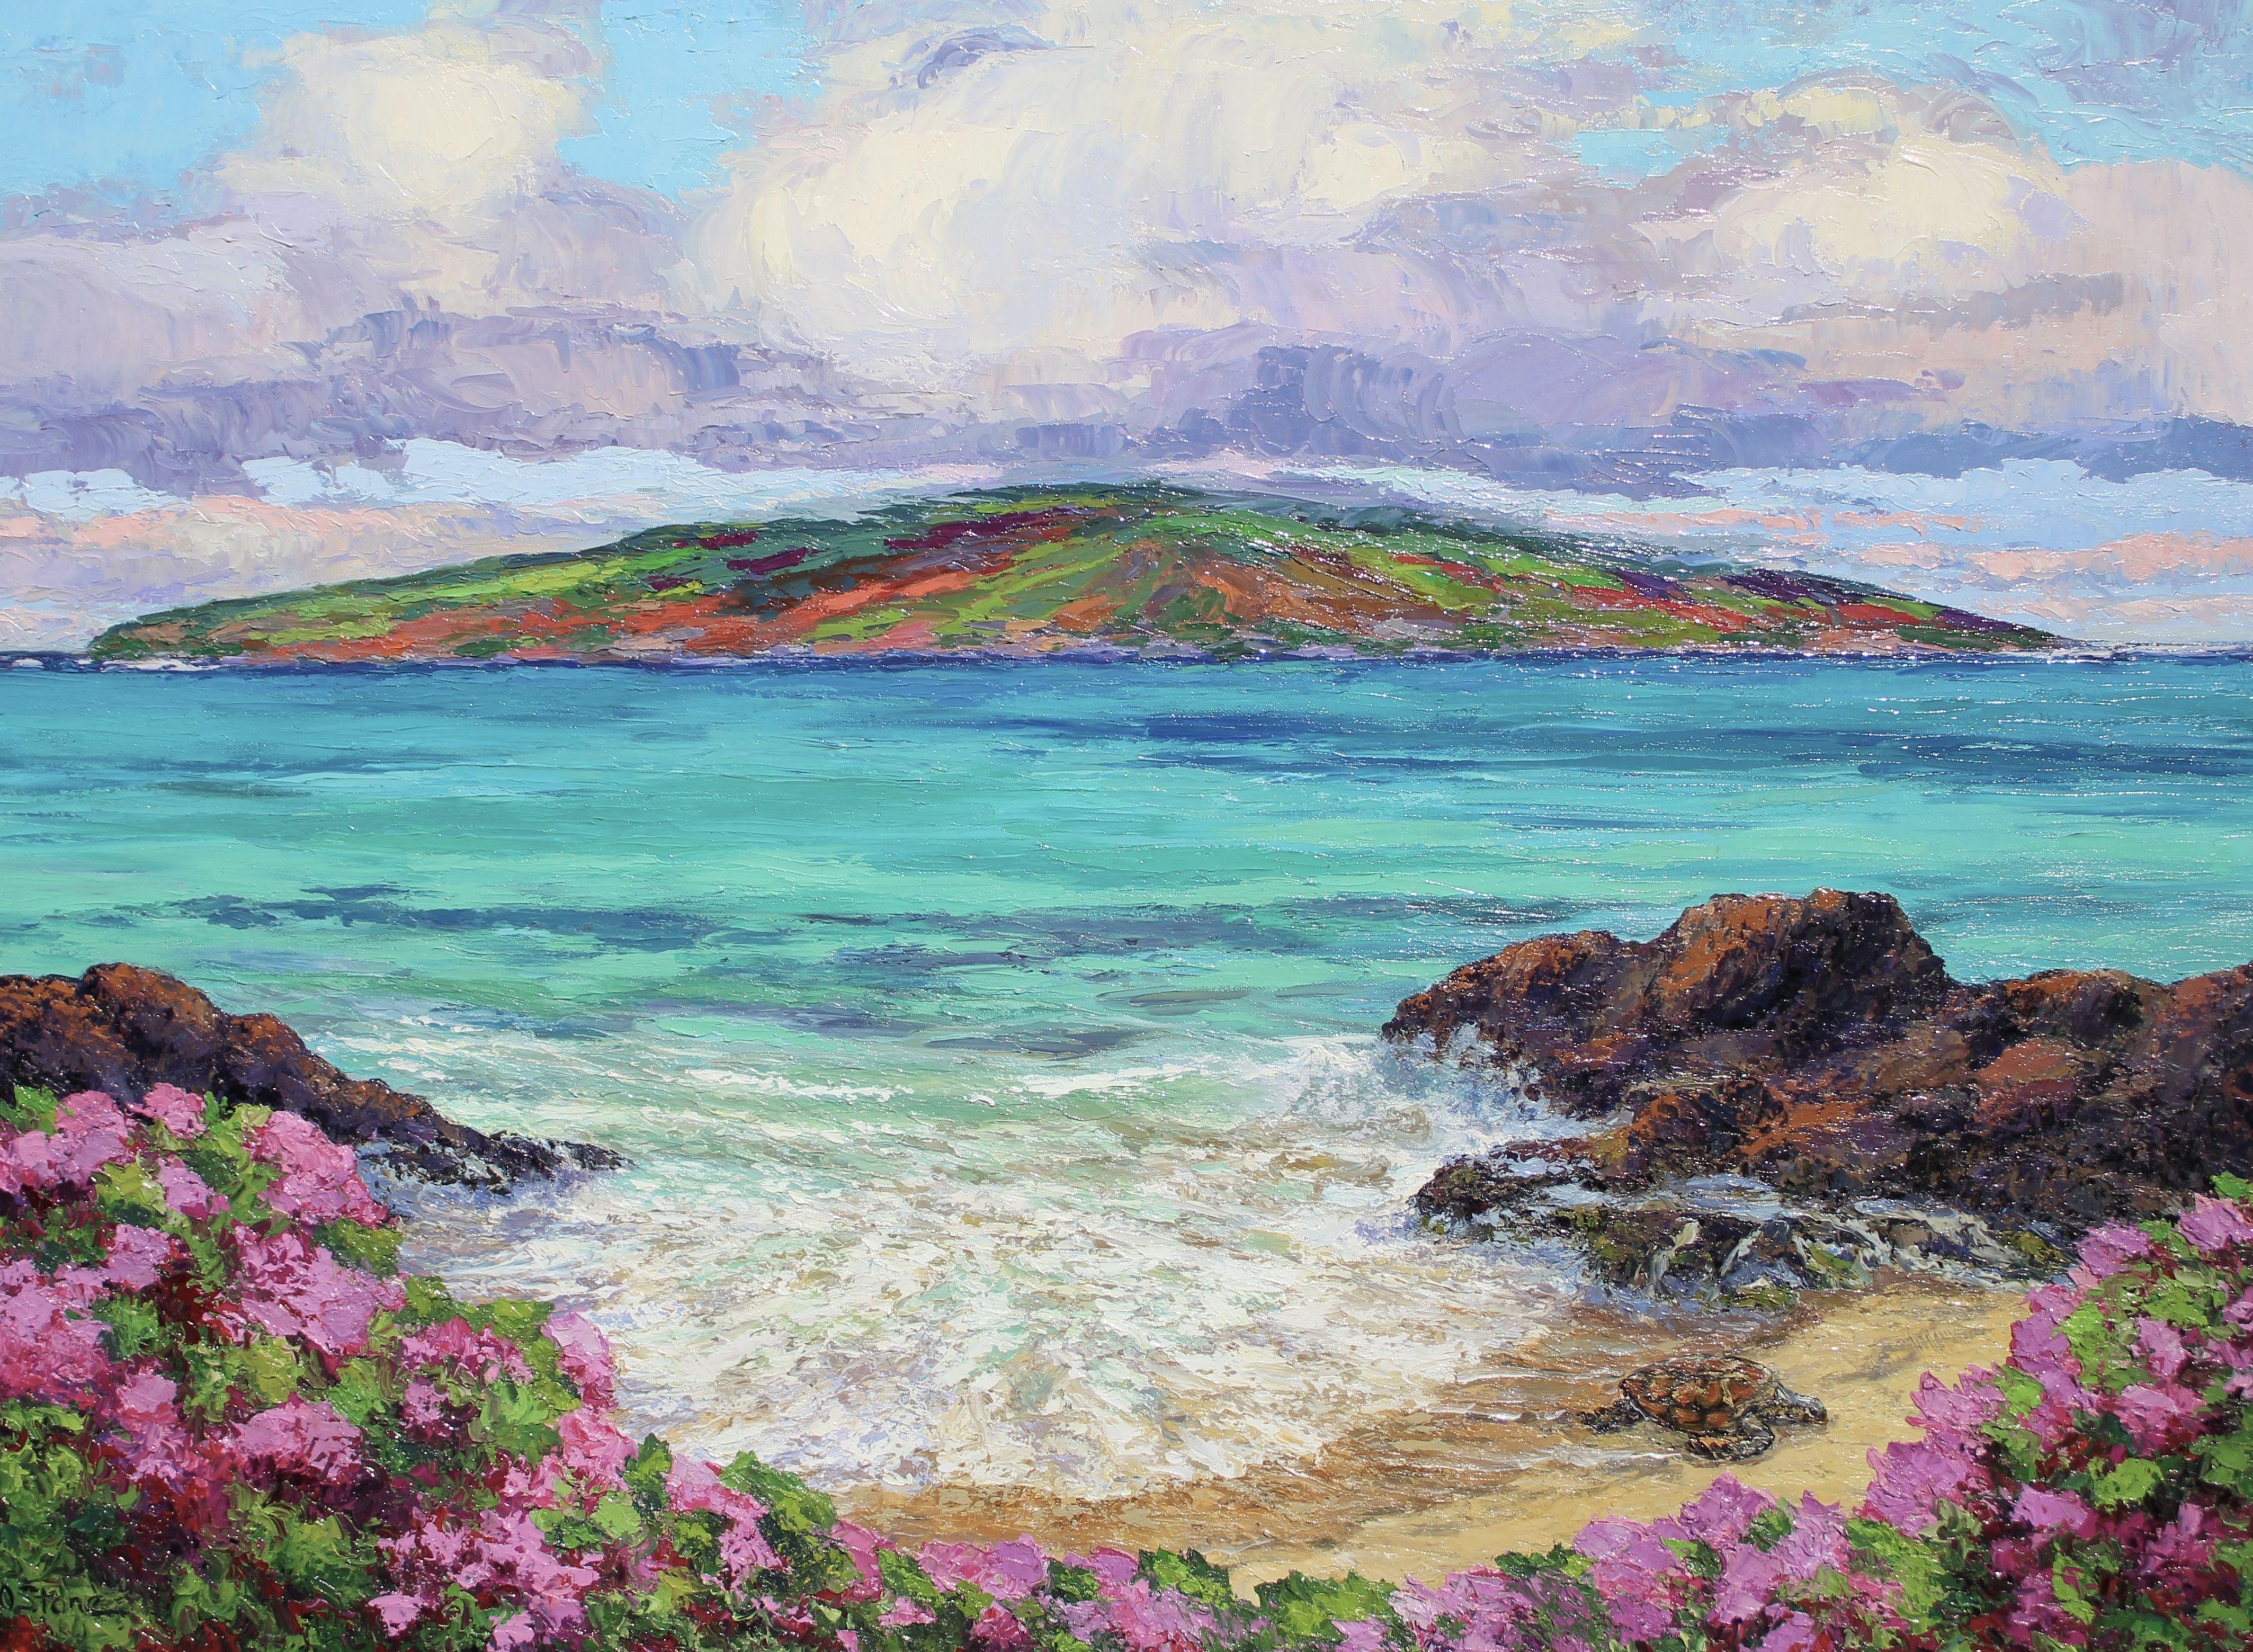 An original Maui seascape oil painting on canvas of a turquoise sea cove, sea rocks, a green sea turtle coming on shore and the offshore island of Kaho'olawe in the distance. The scene is framed by colorful bougainvillea flowers. Painted with a